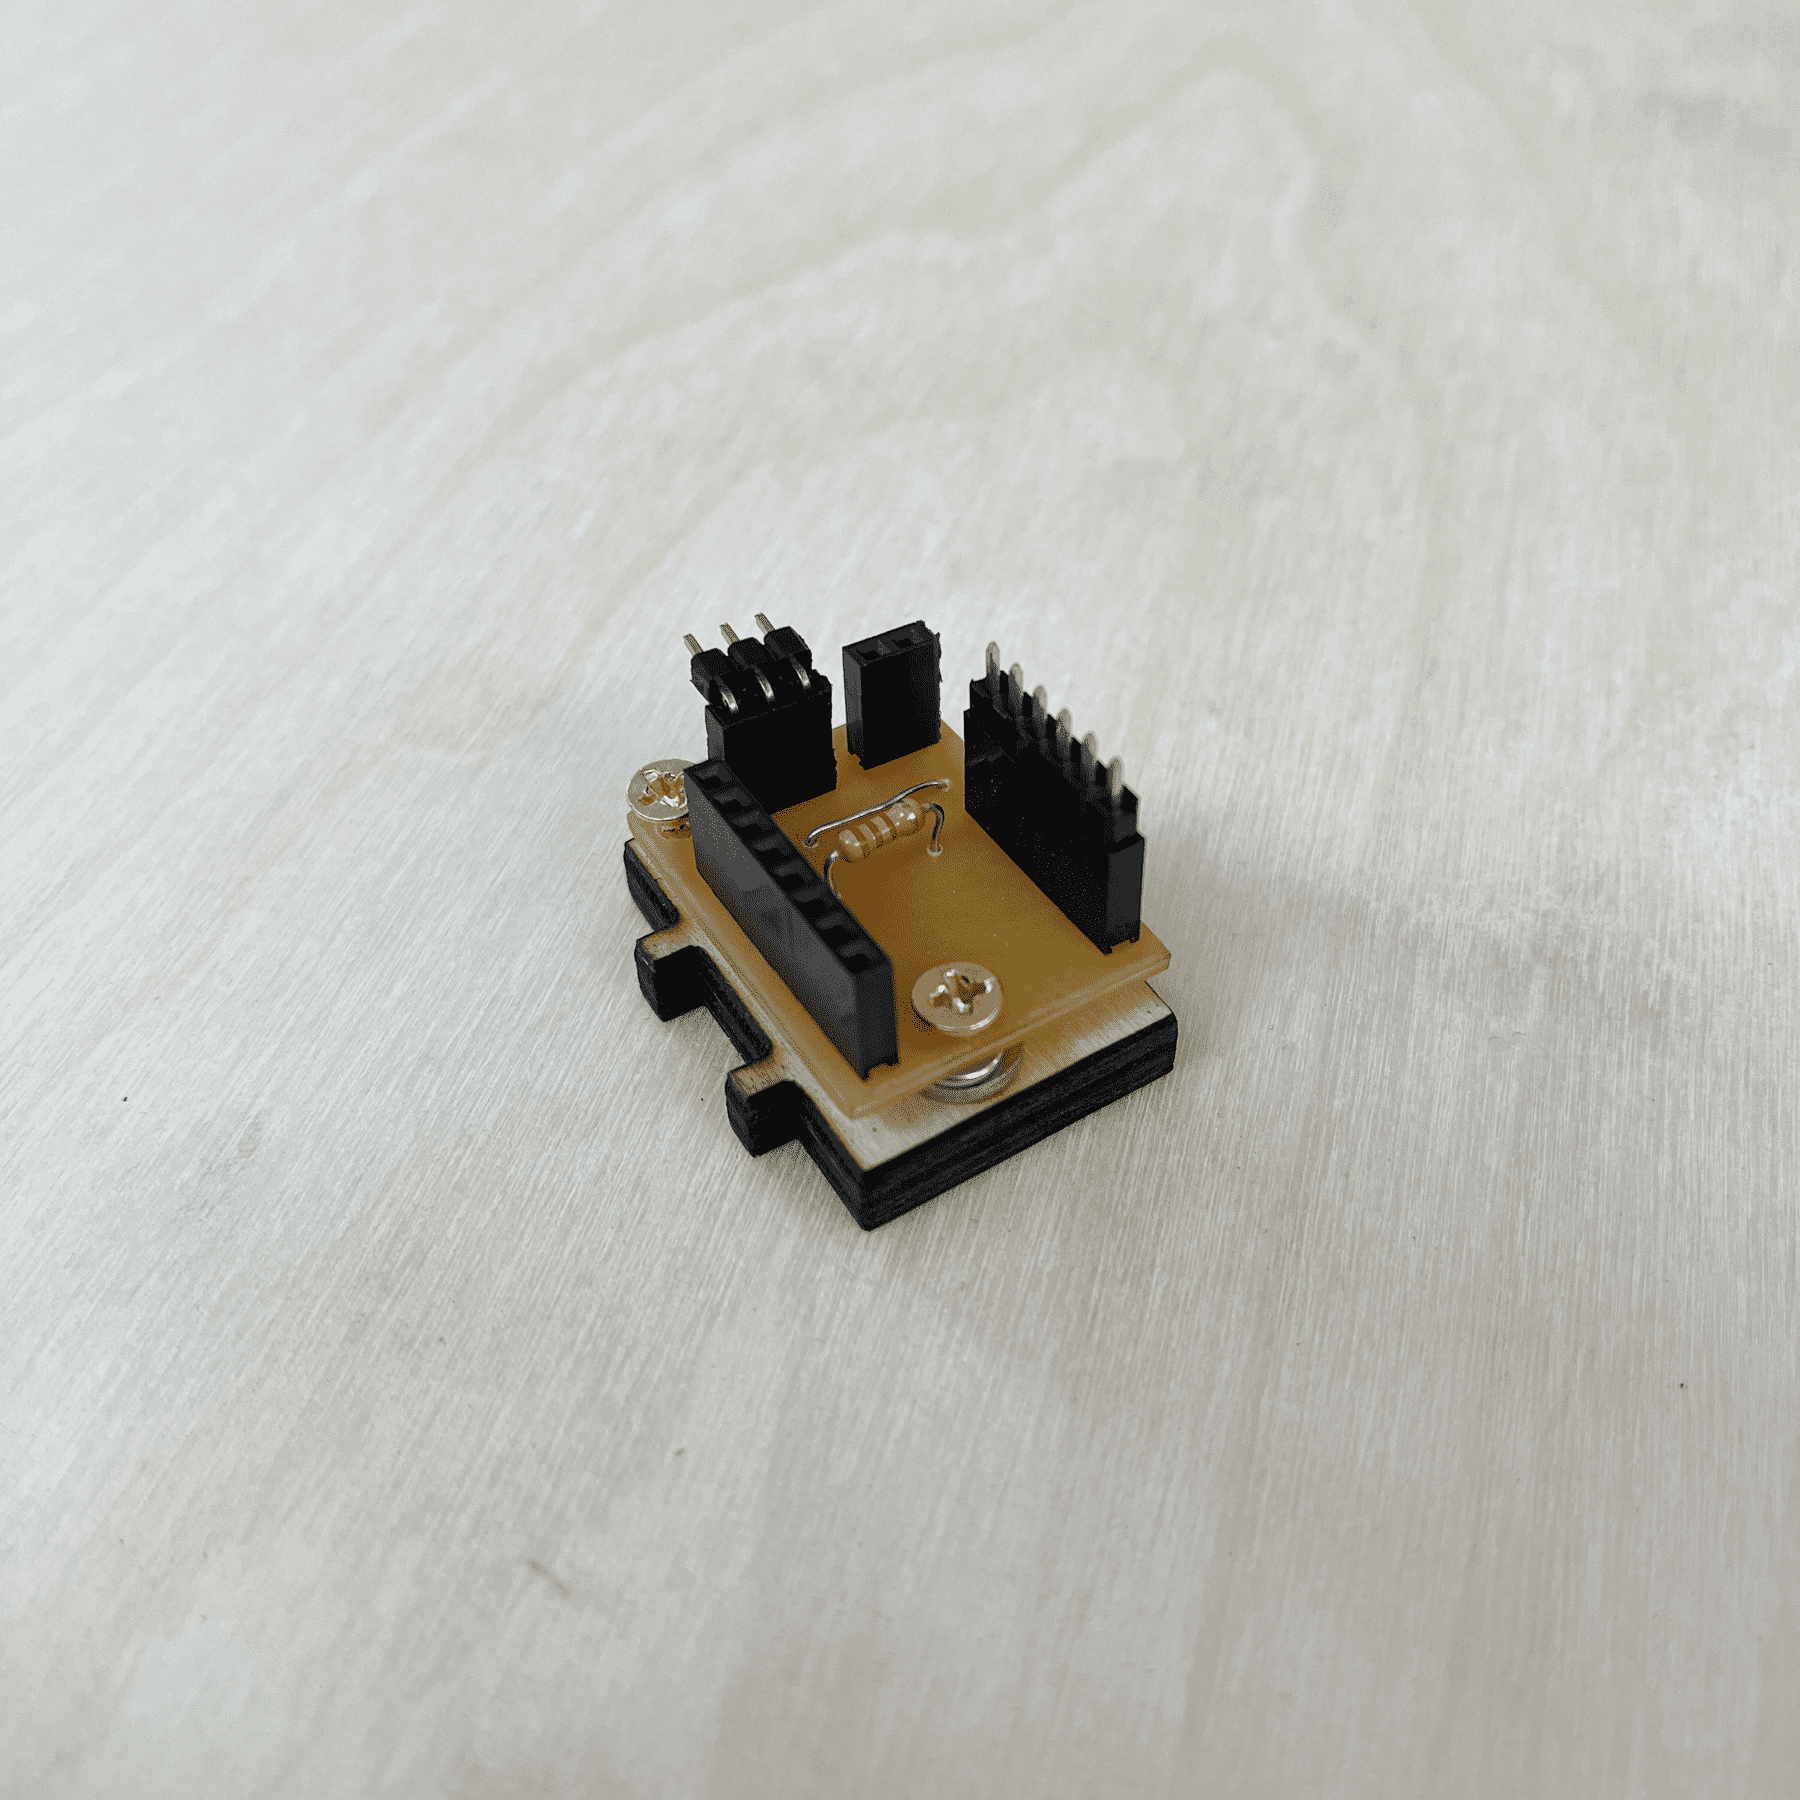 The PCB mount